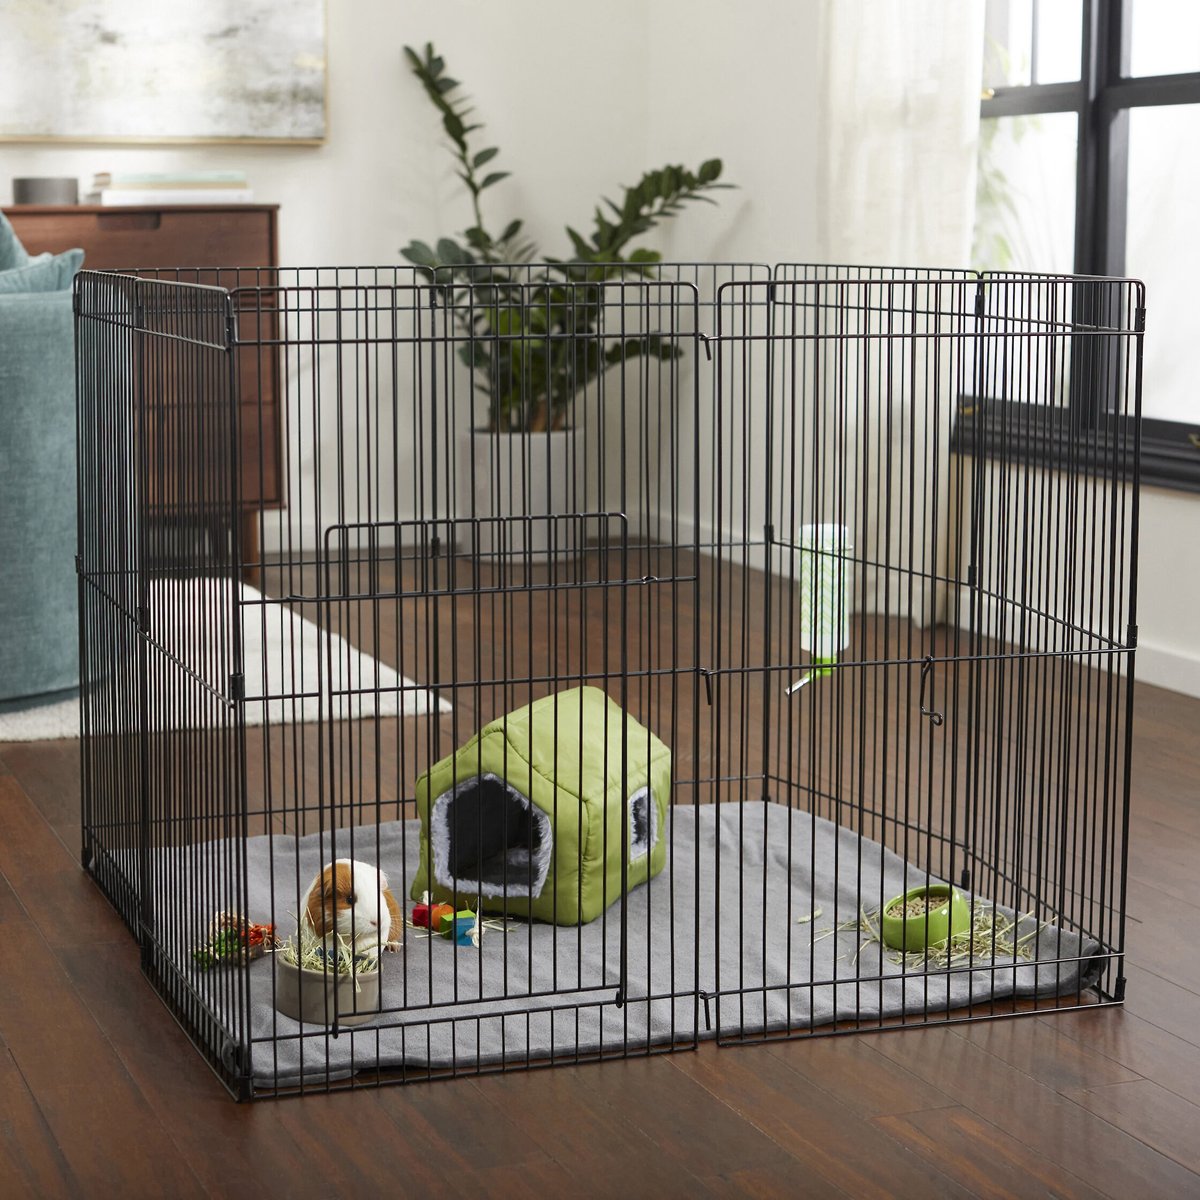 How to Choose the Best Place for a Guinea Pig Cage